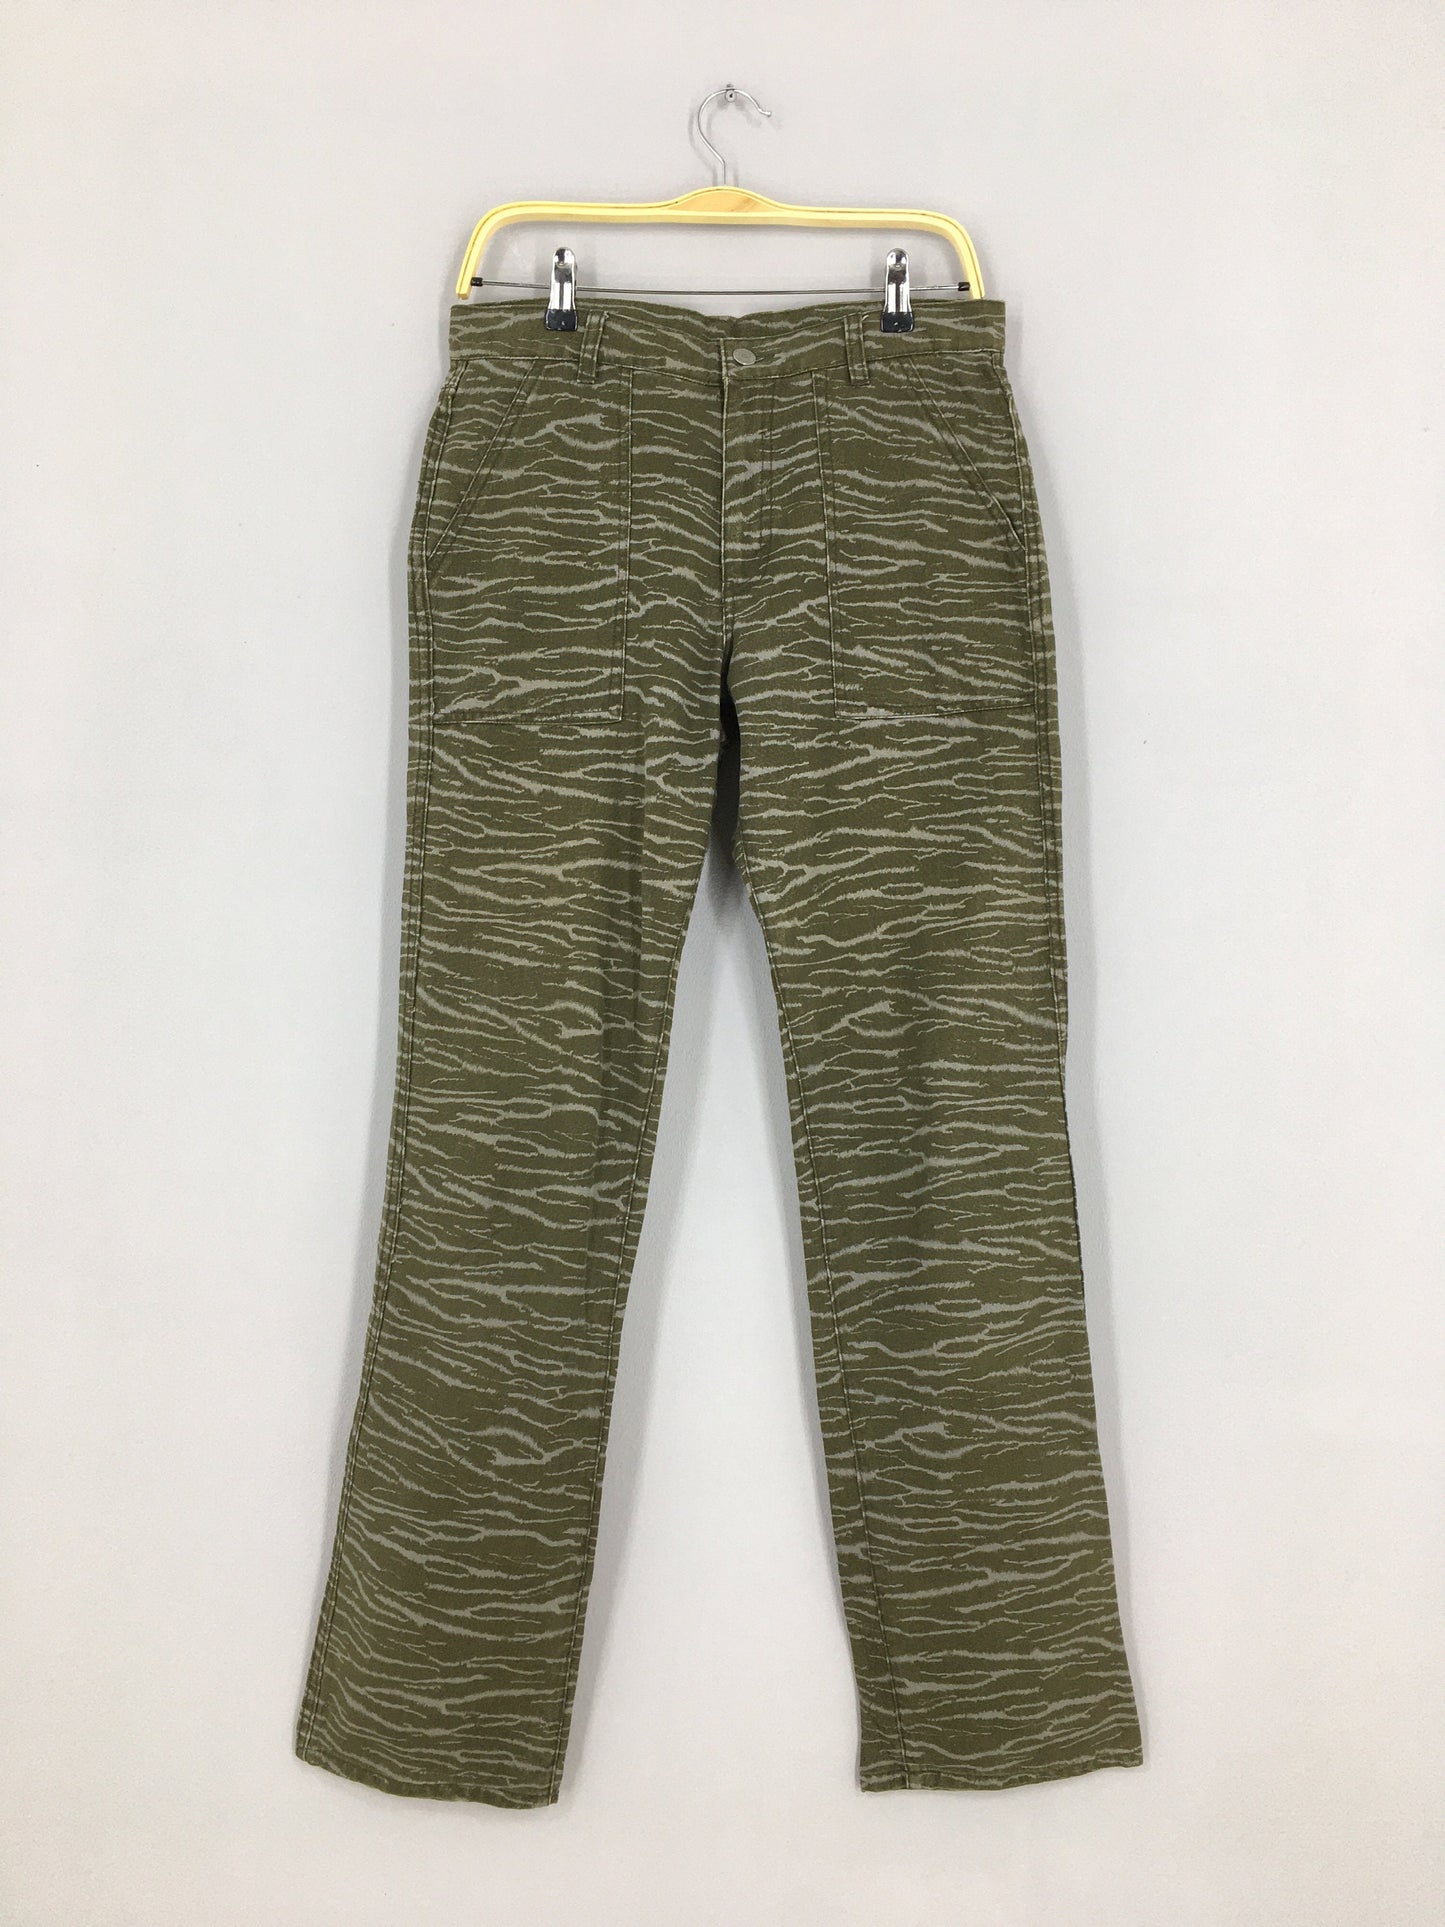 Japanese Right-On Camo Tiger Stripes Pants Size 31x31